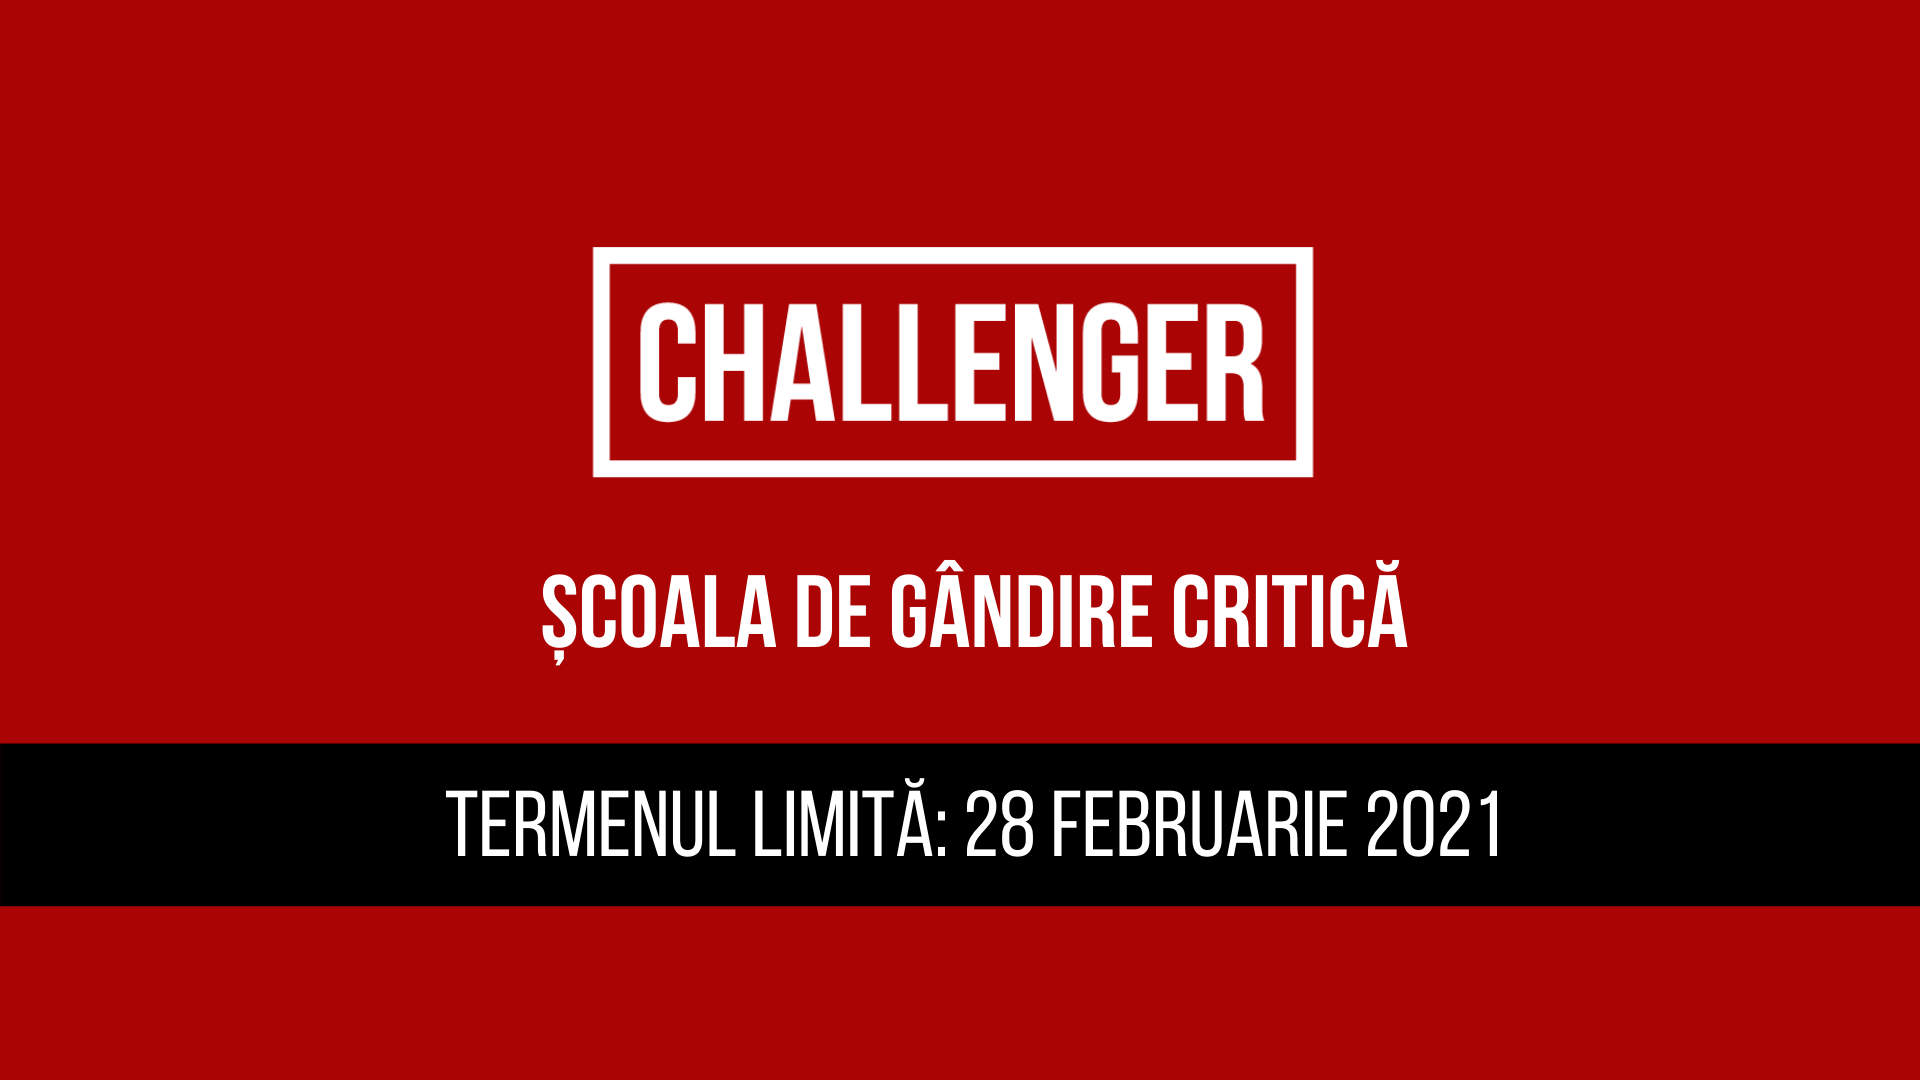 CHALLENGER is recruiting participants for the 8th EDITION!